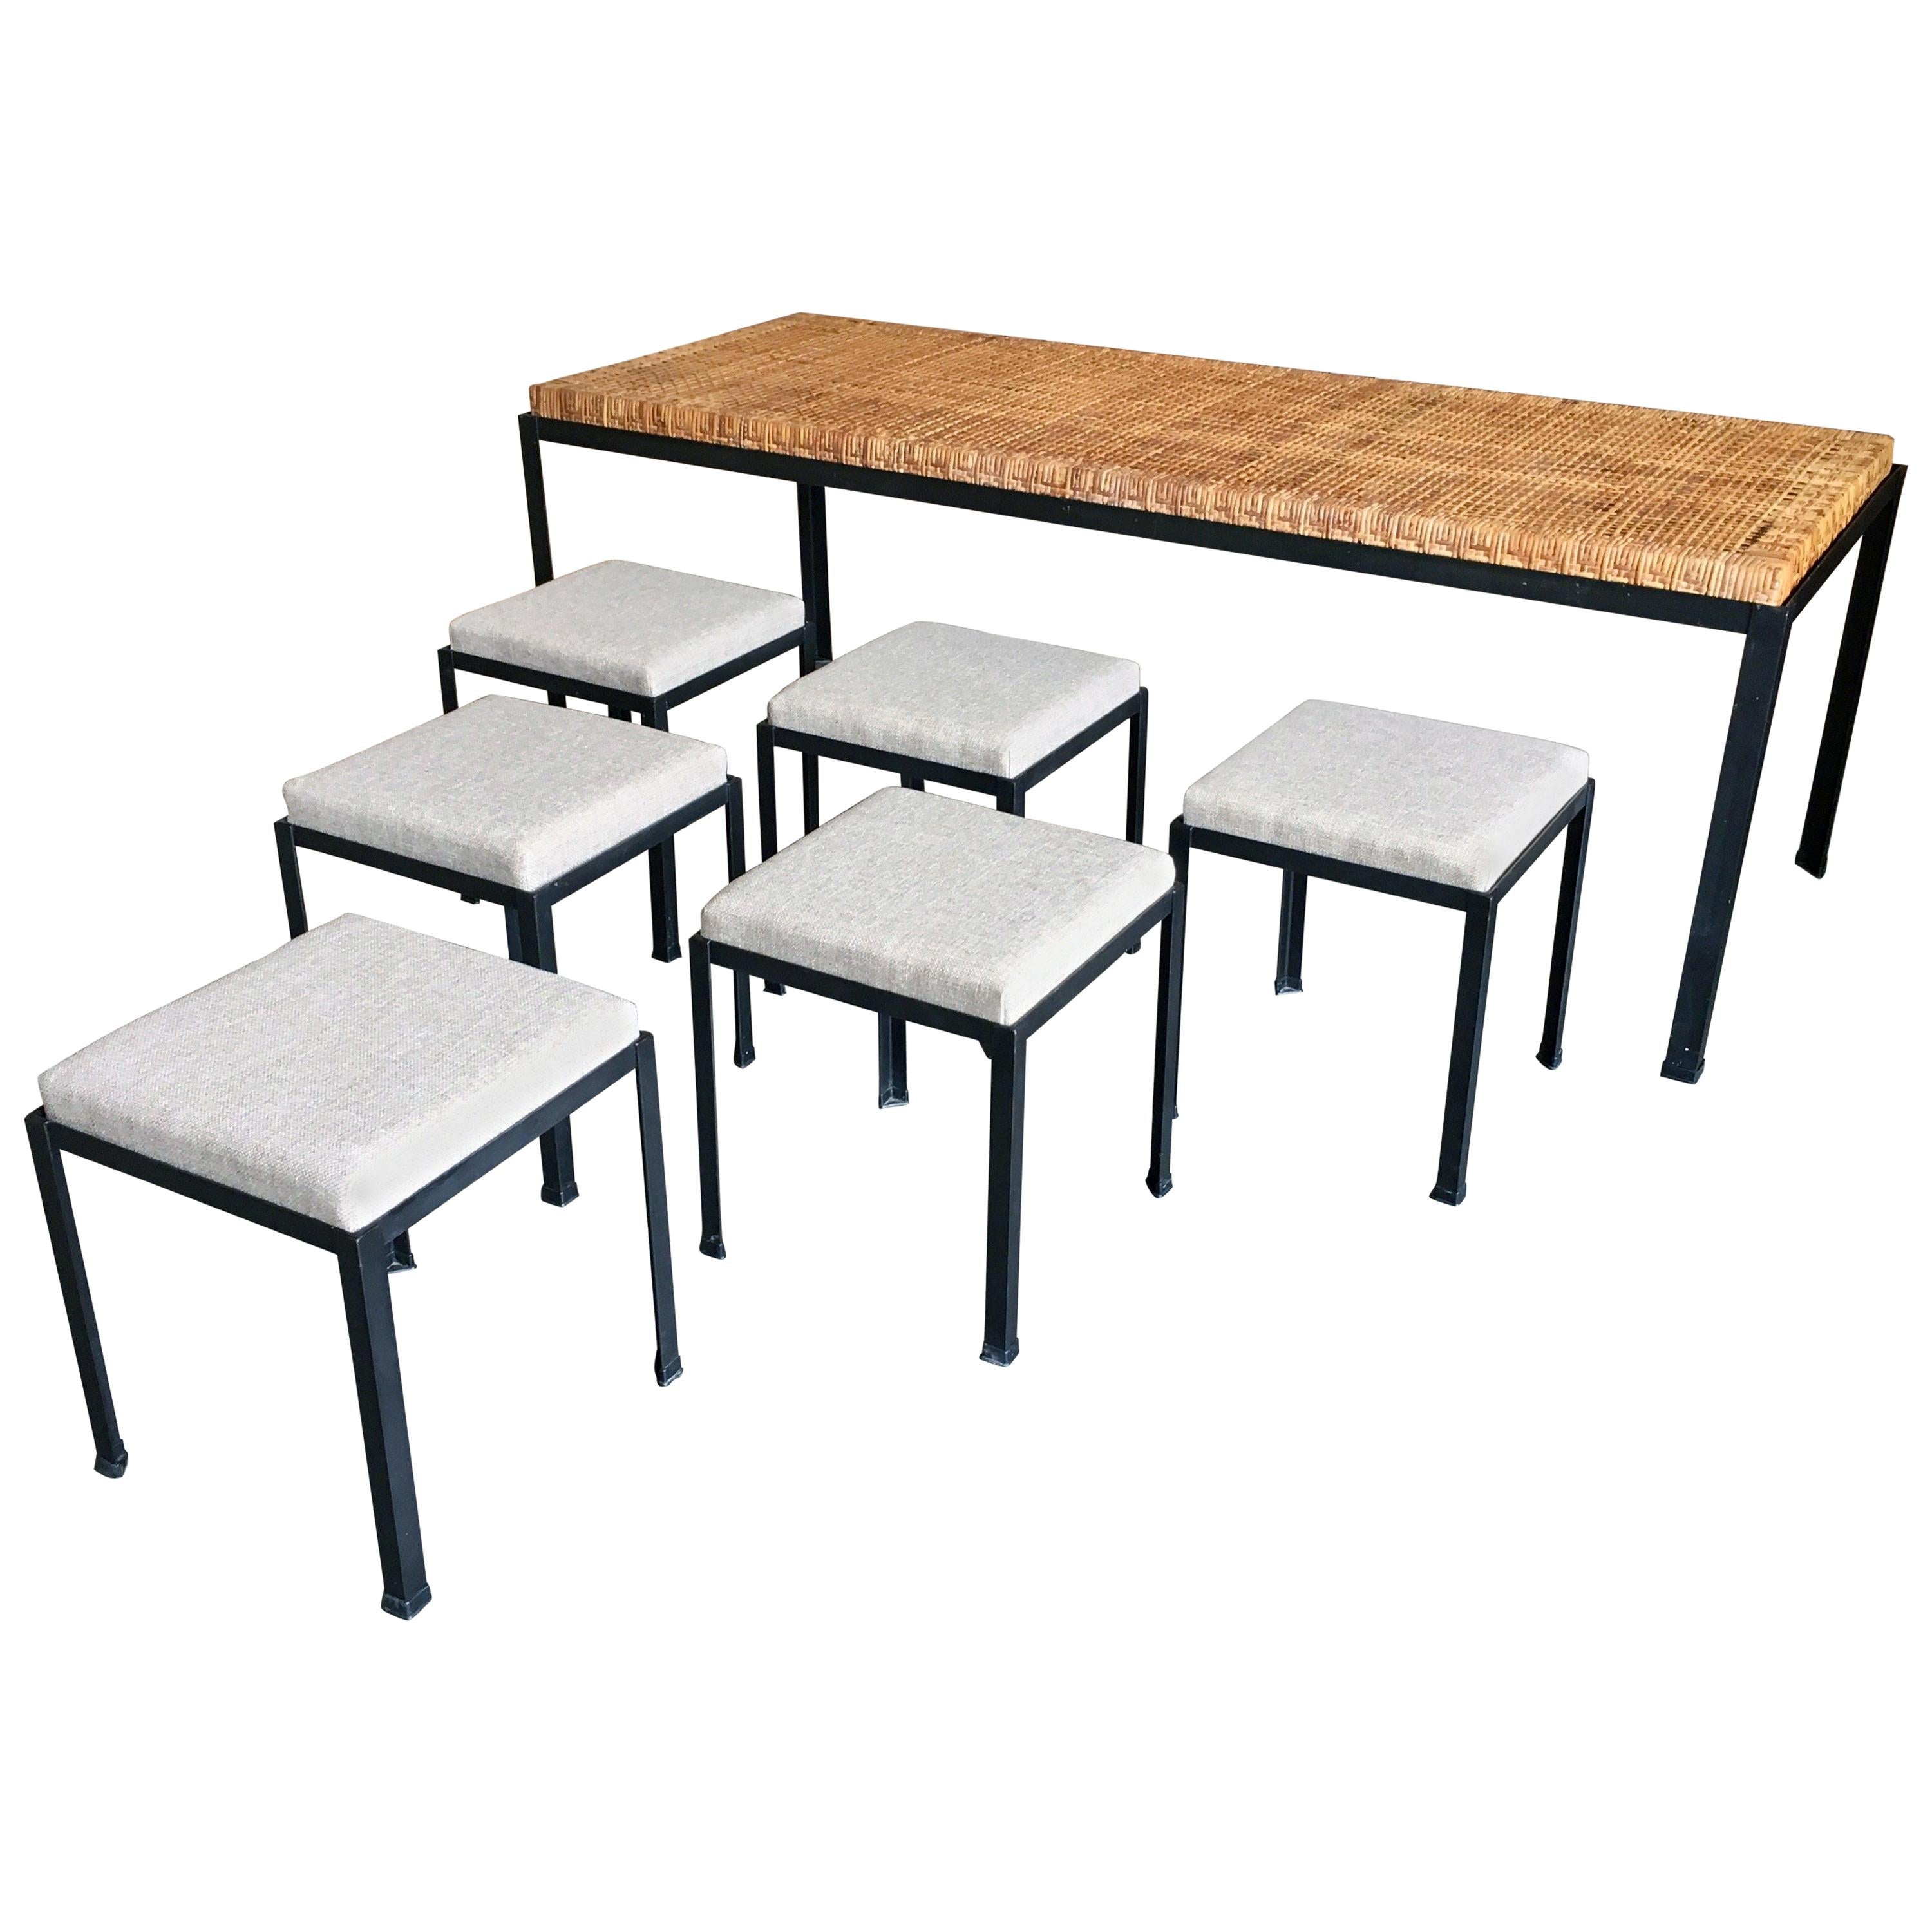 Danny Ho Fong Cane Top Table and Six Stools